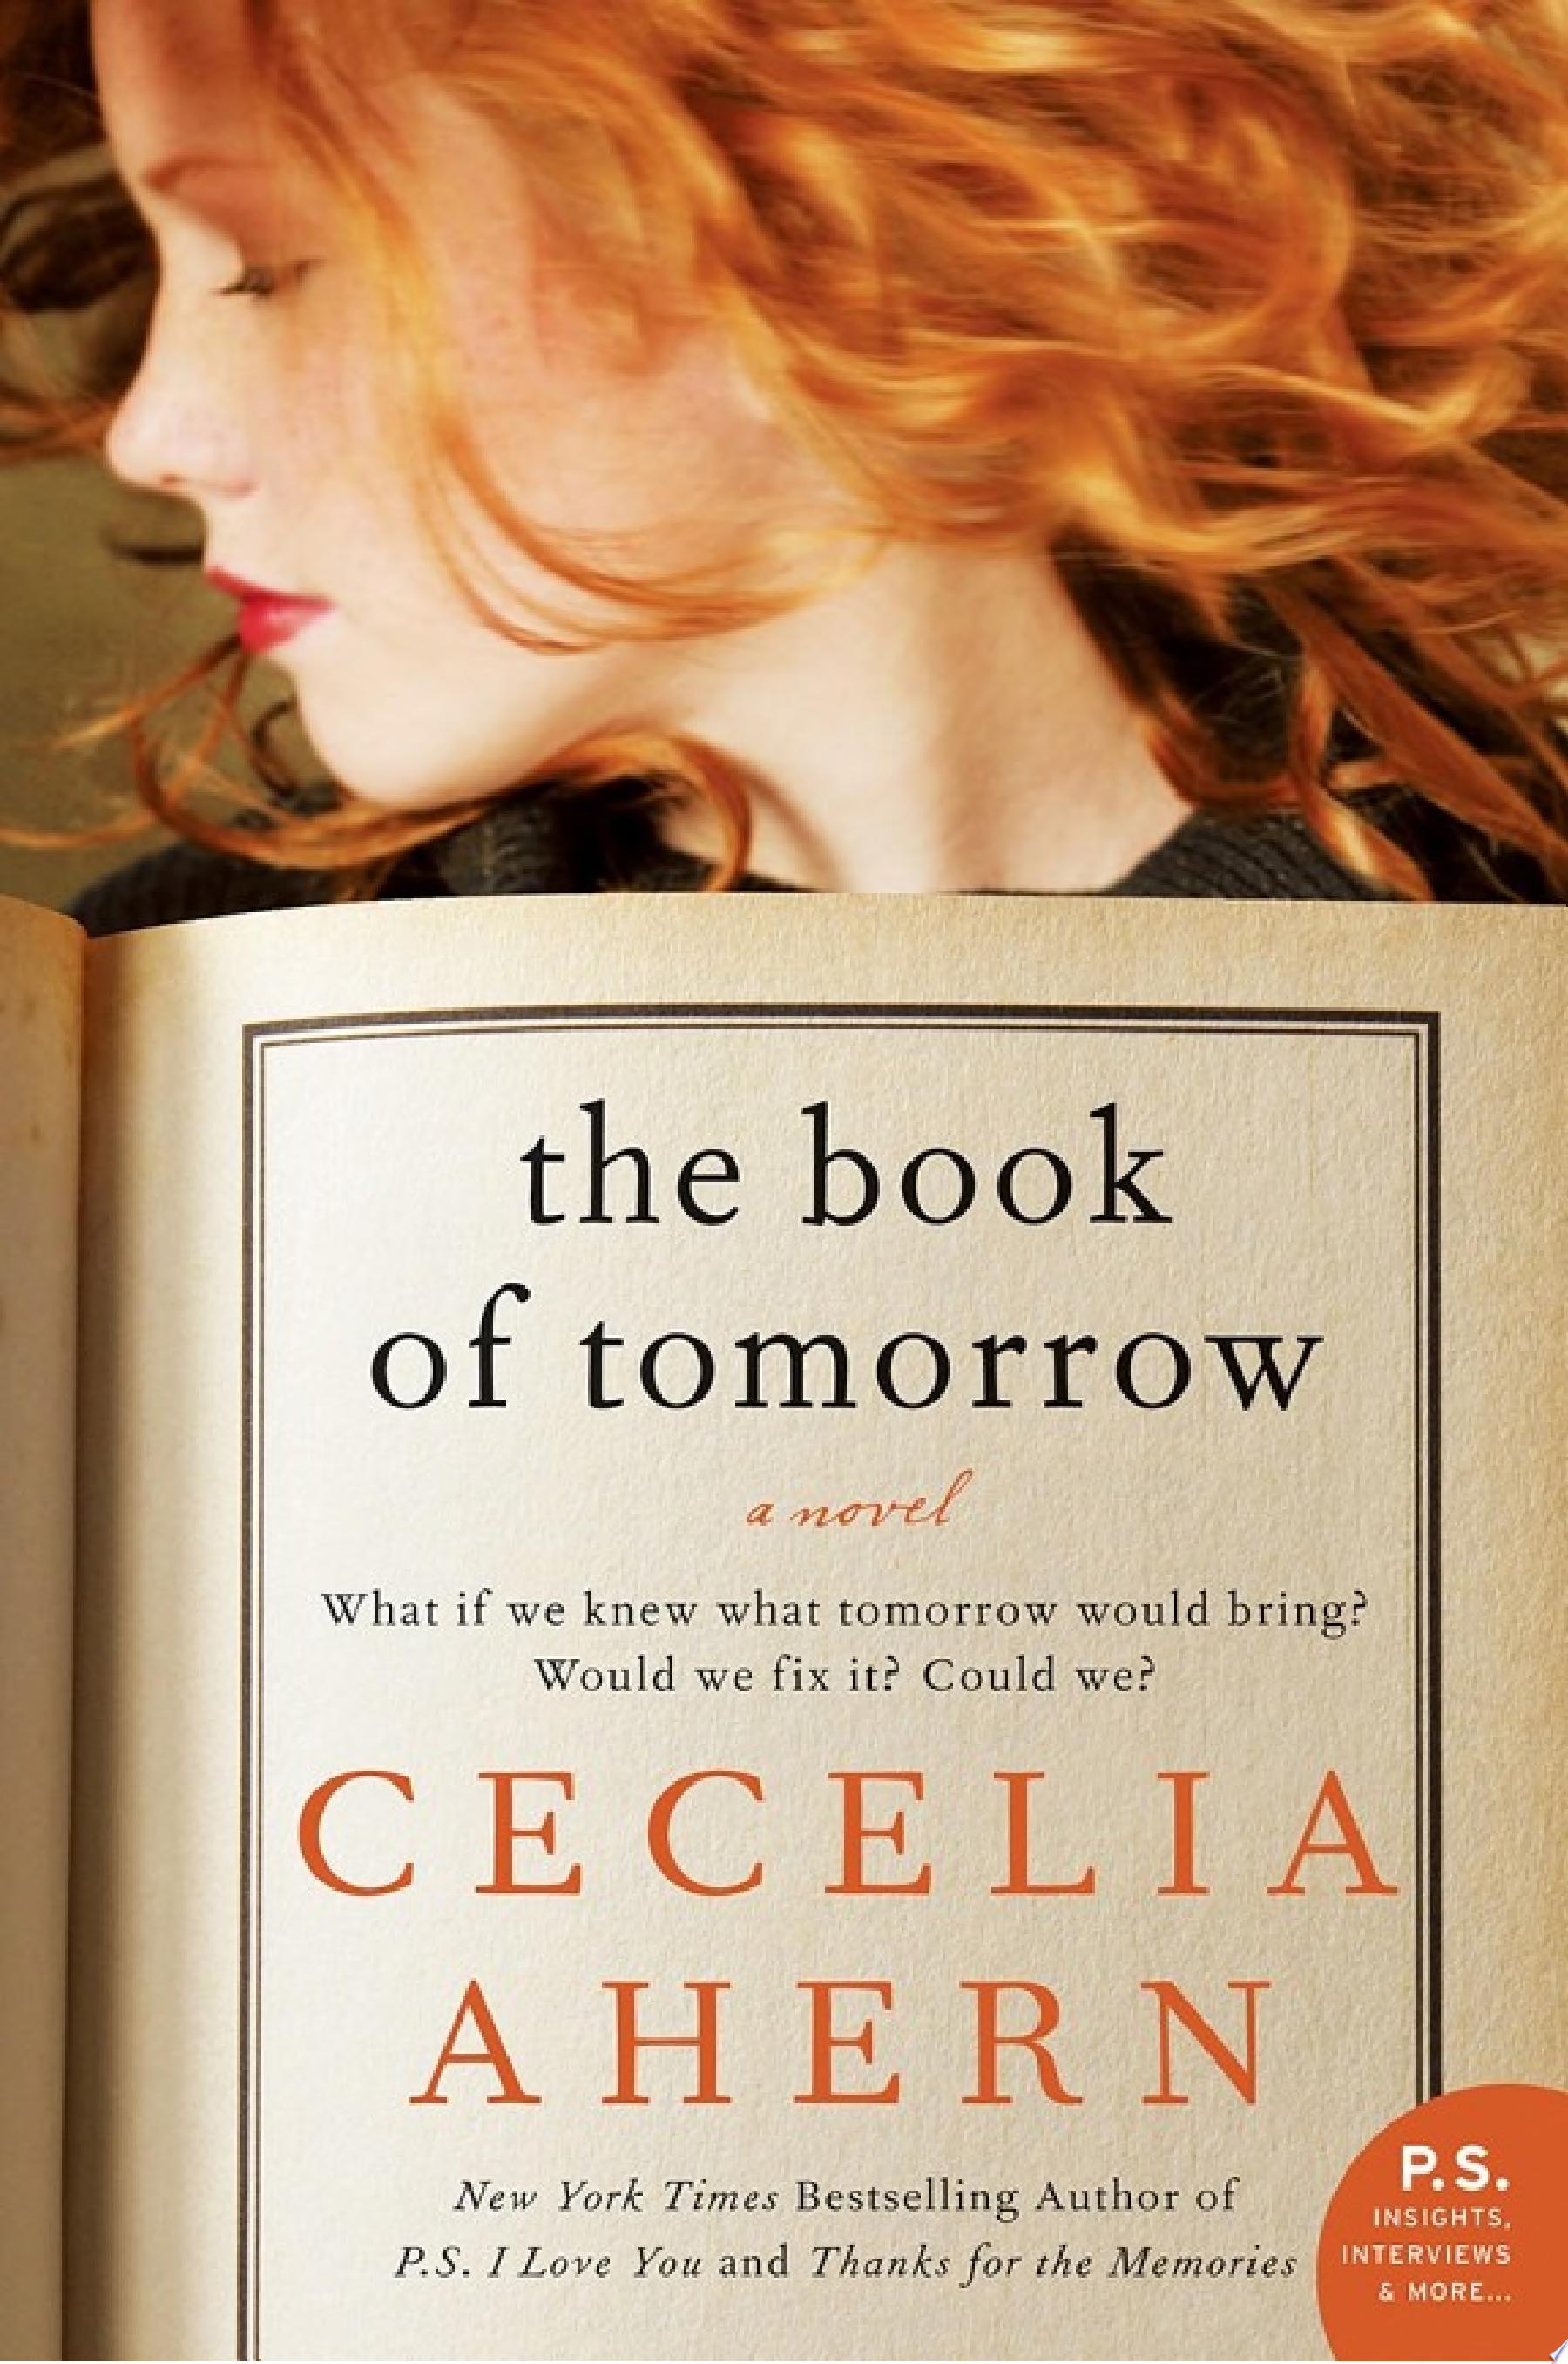 Image for "The Book of Tomorrow"